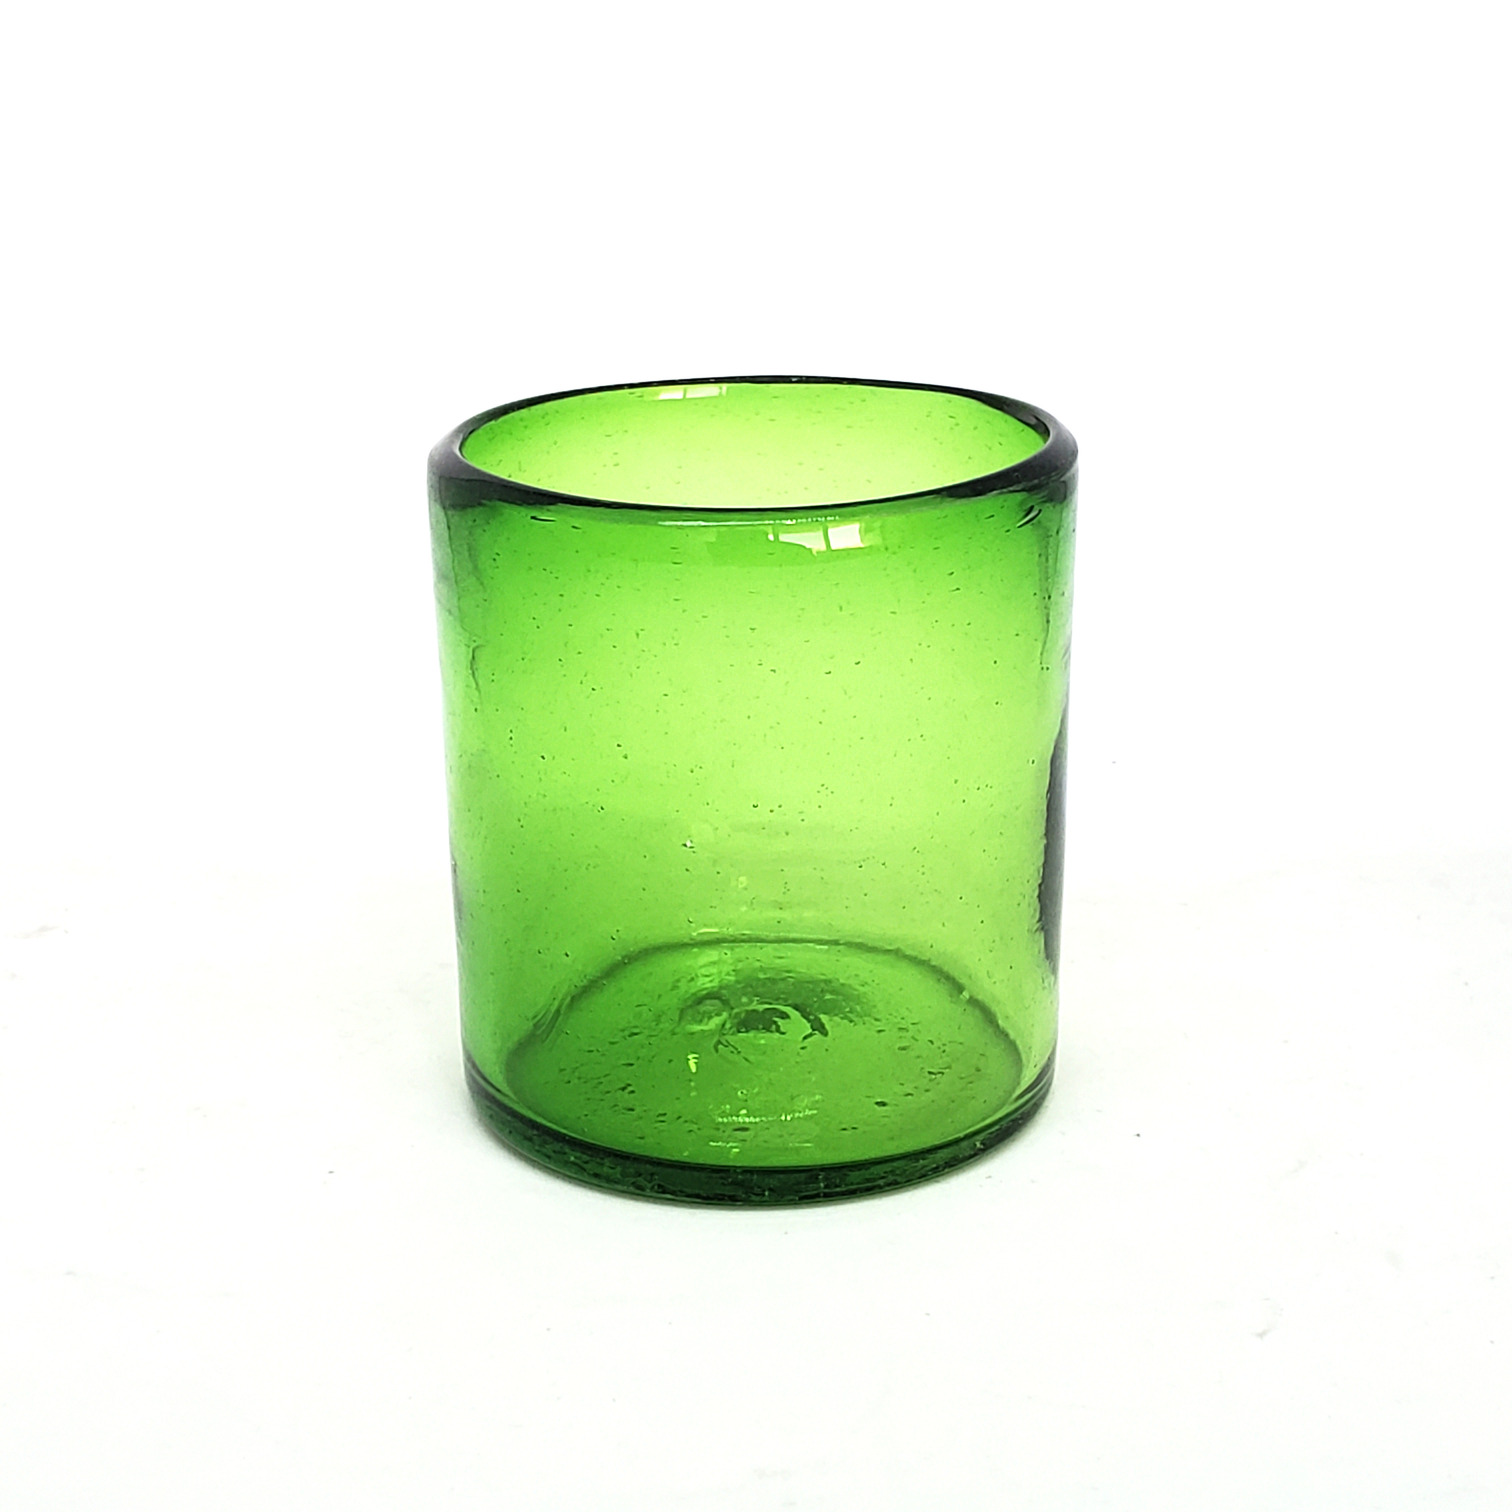 MEXICAN GLASSWARE / Solid Emerald Green 9 oz Short Tumblers (set of 6) / Enhance your favorite drink with these colorful handcrafted glasses.